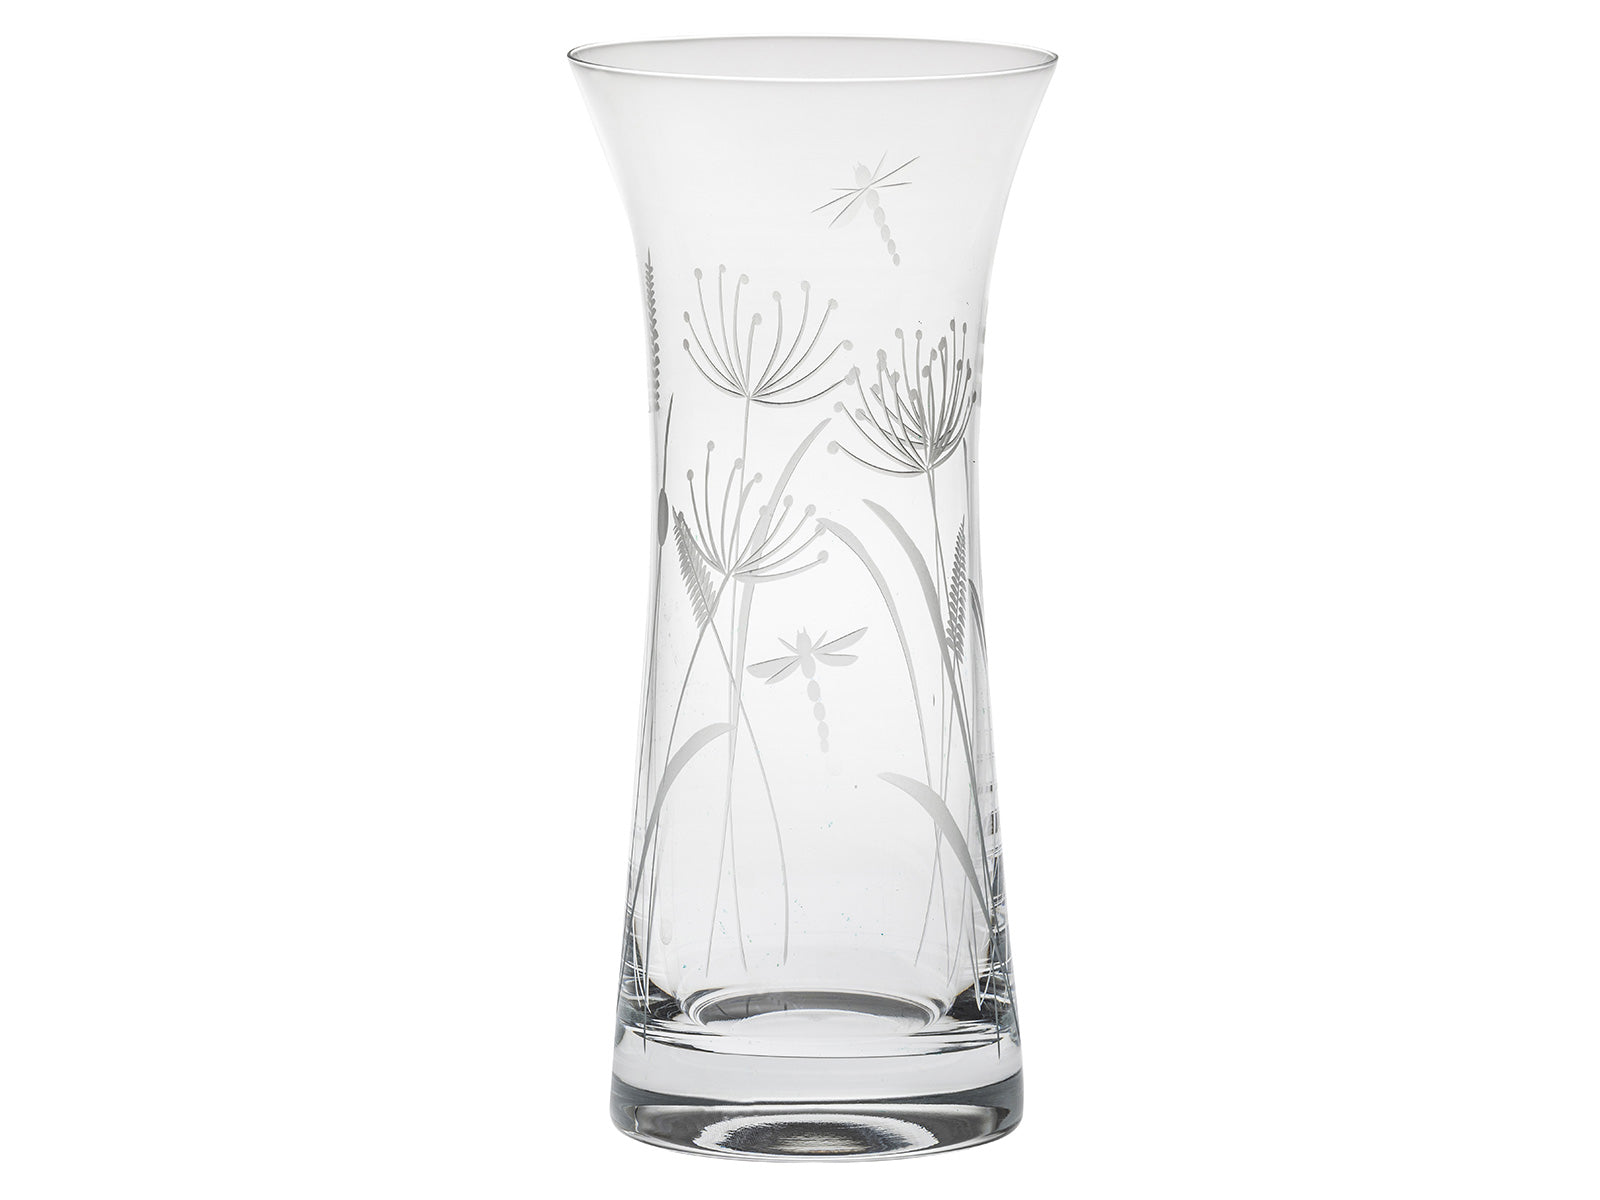 Royal Scot Crystal Dragonfly Vase - Lily is hand-cut in Britain with the Sanderson design of bulrushes and dandelions, as well as two dragonflies flying amongst the foliage. The vase itself is long, slender and flares outward at the top as well as having a weighted bottom.